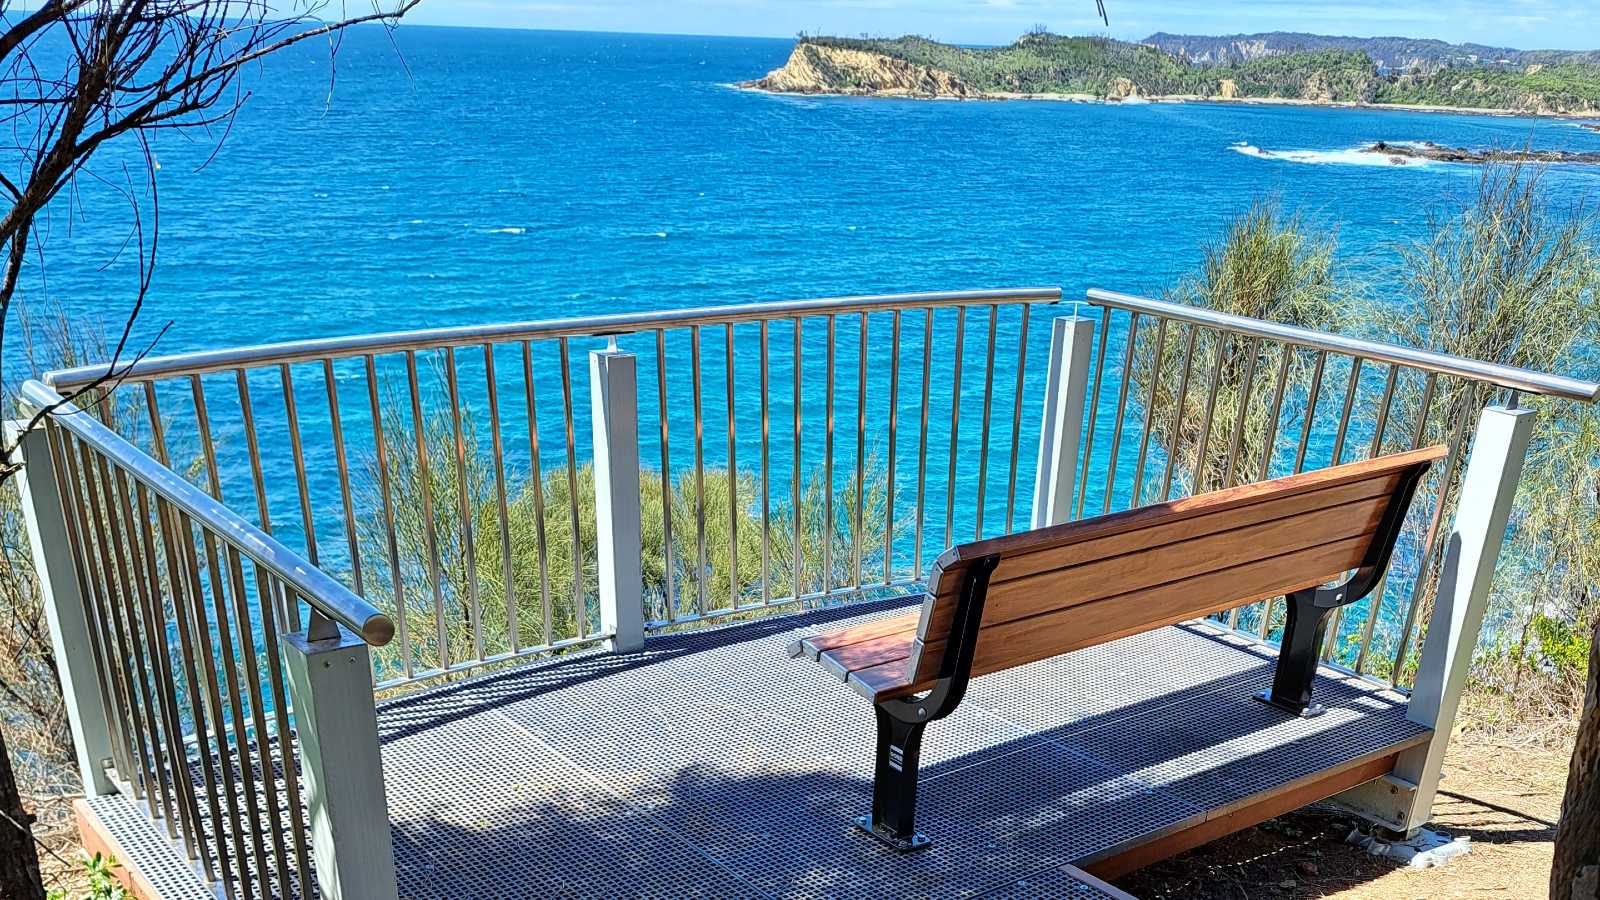 Image A viewing platform with a wooden bench seat overlooks blue ocean and a rugged coastline.